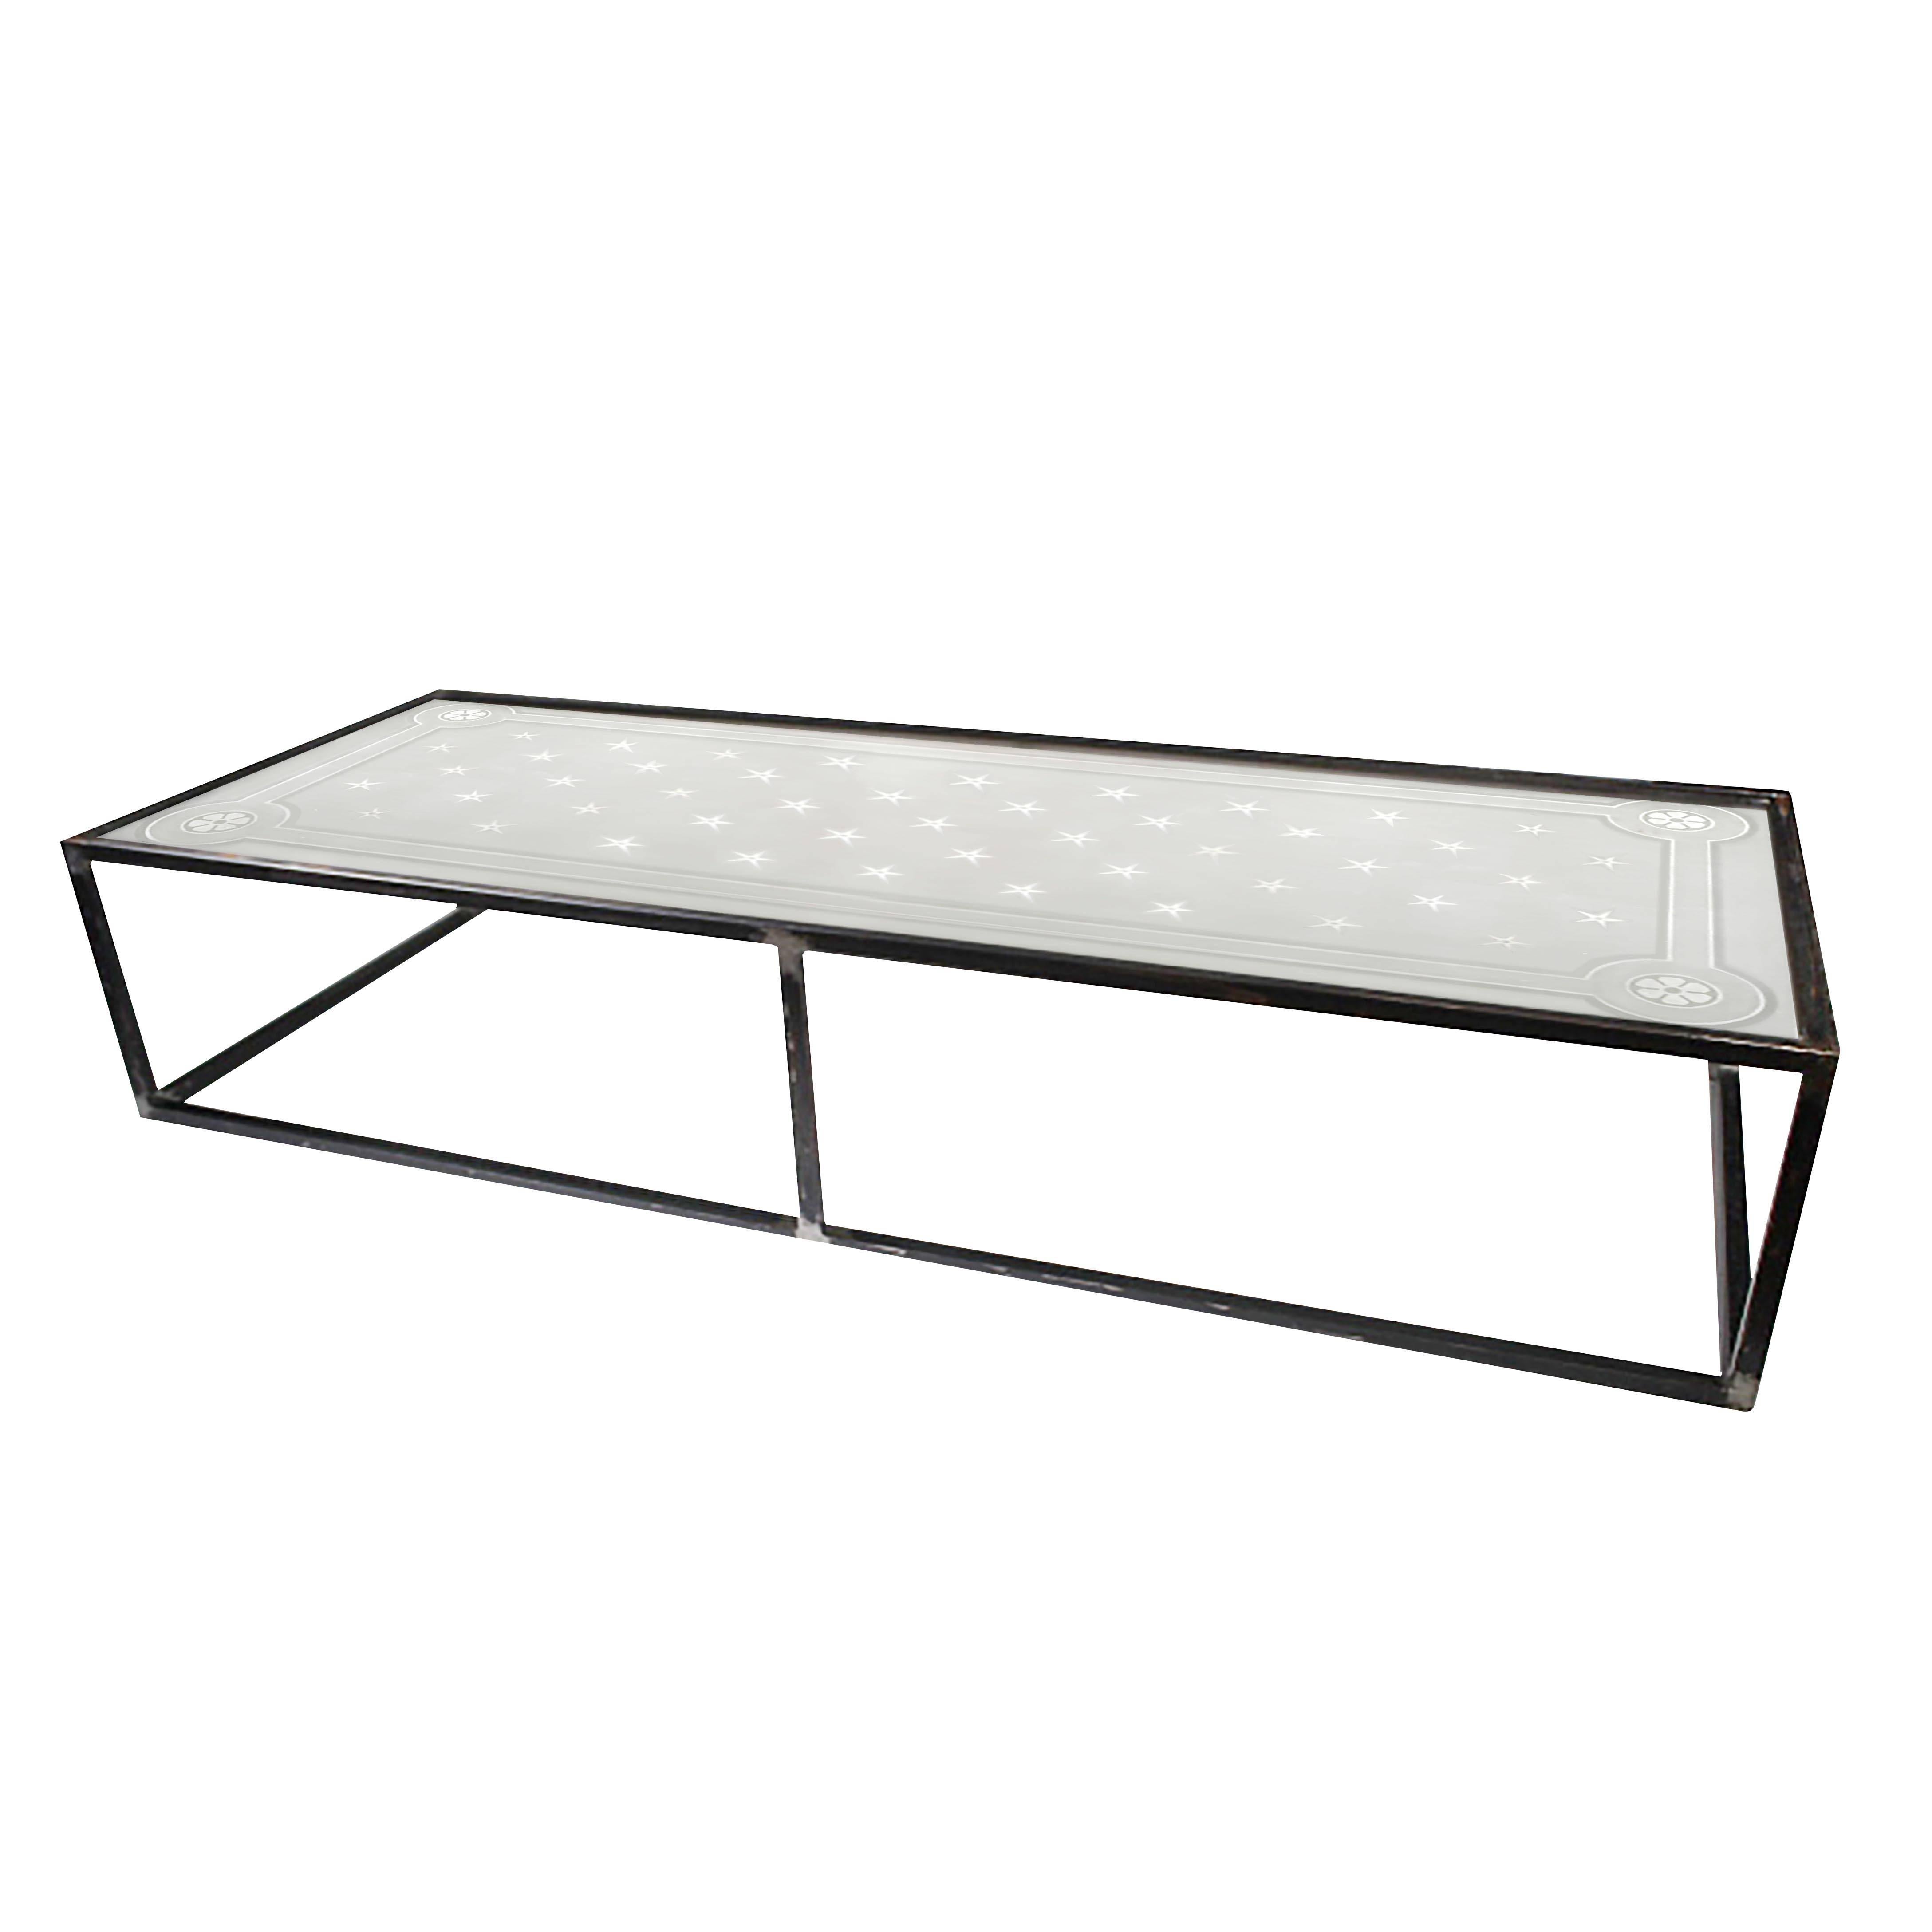 Antique Large Steel and Etched Glass Coffee Table c. 1900